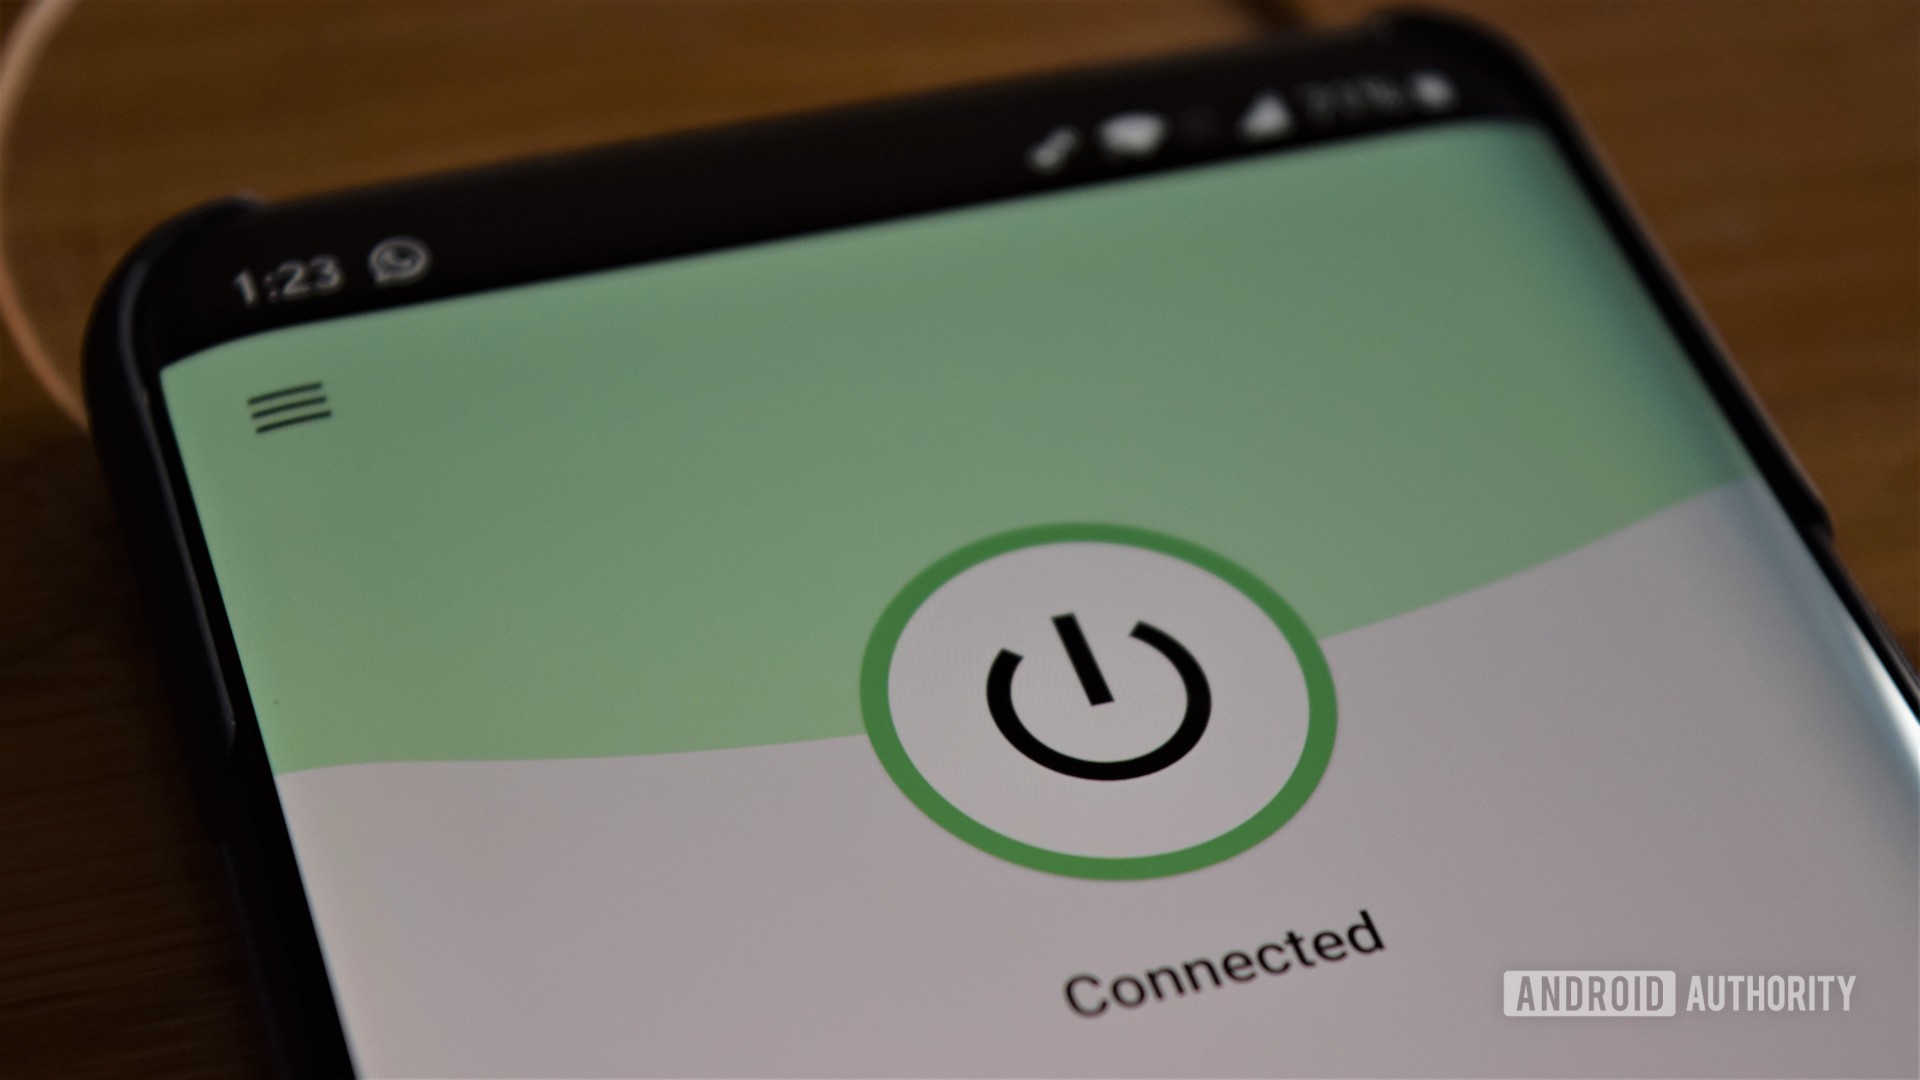 expressvpn review - connected to a server